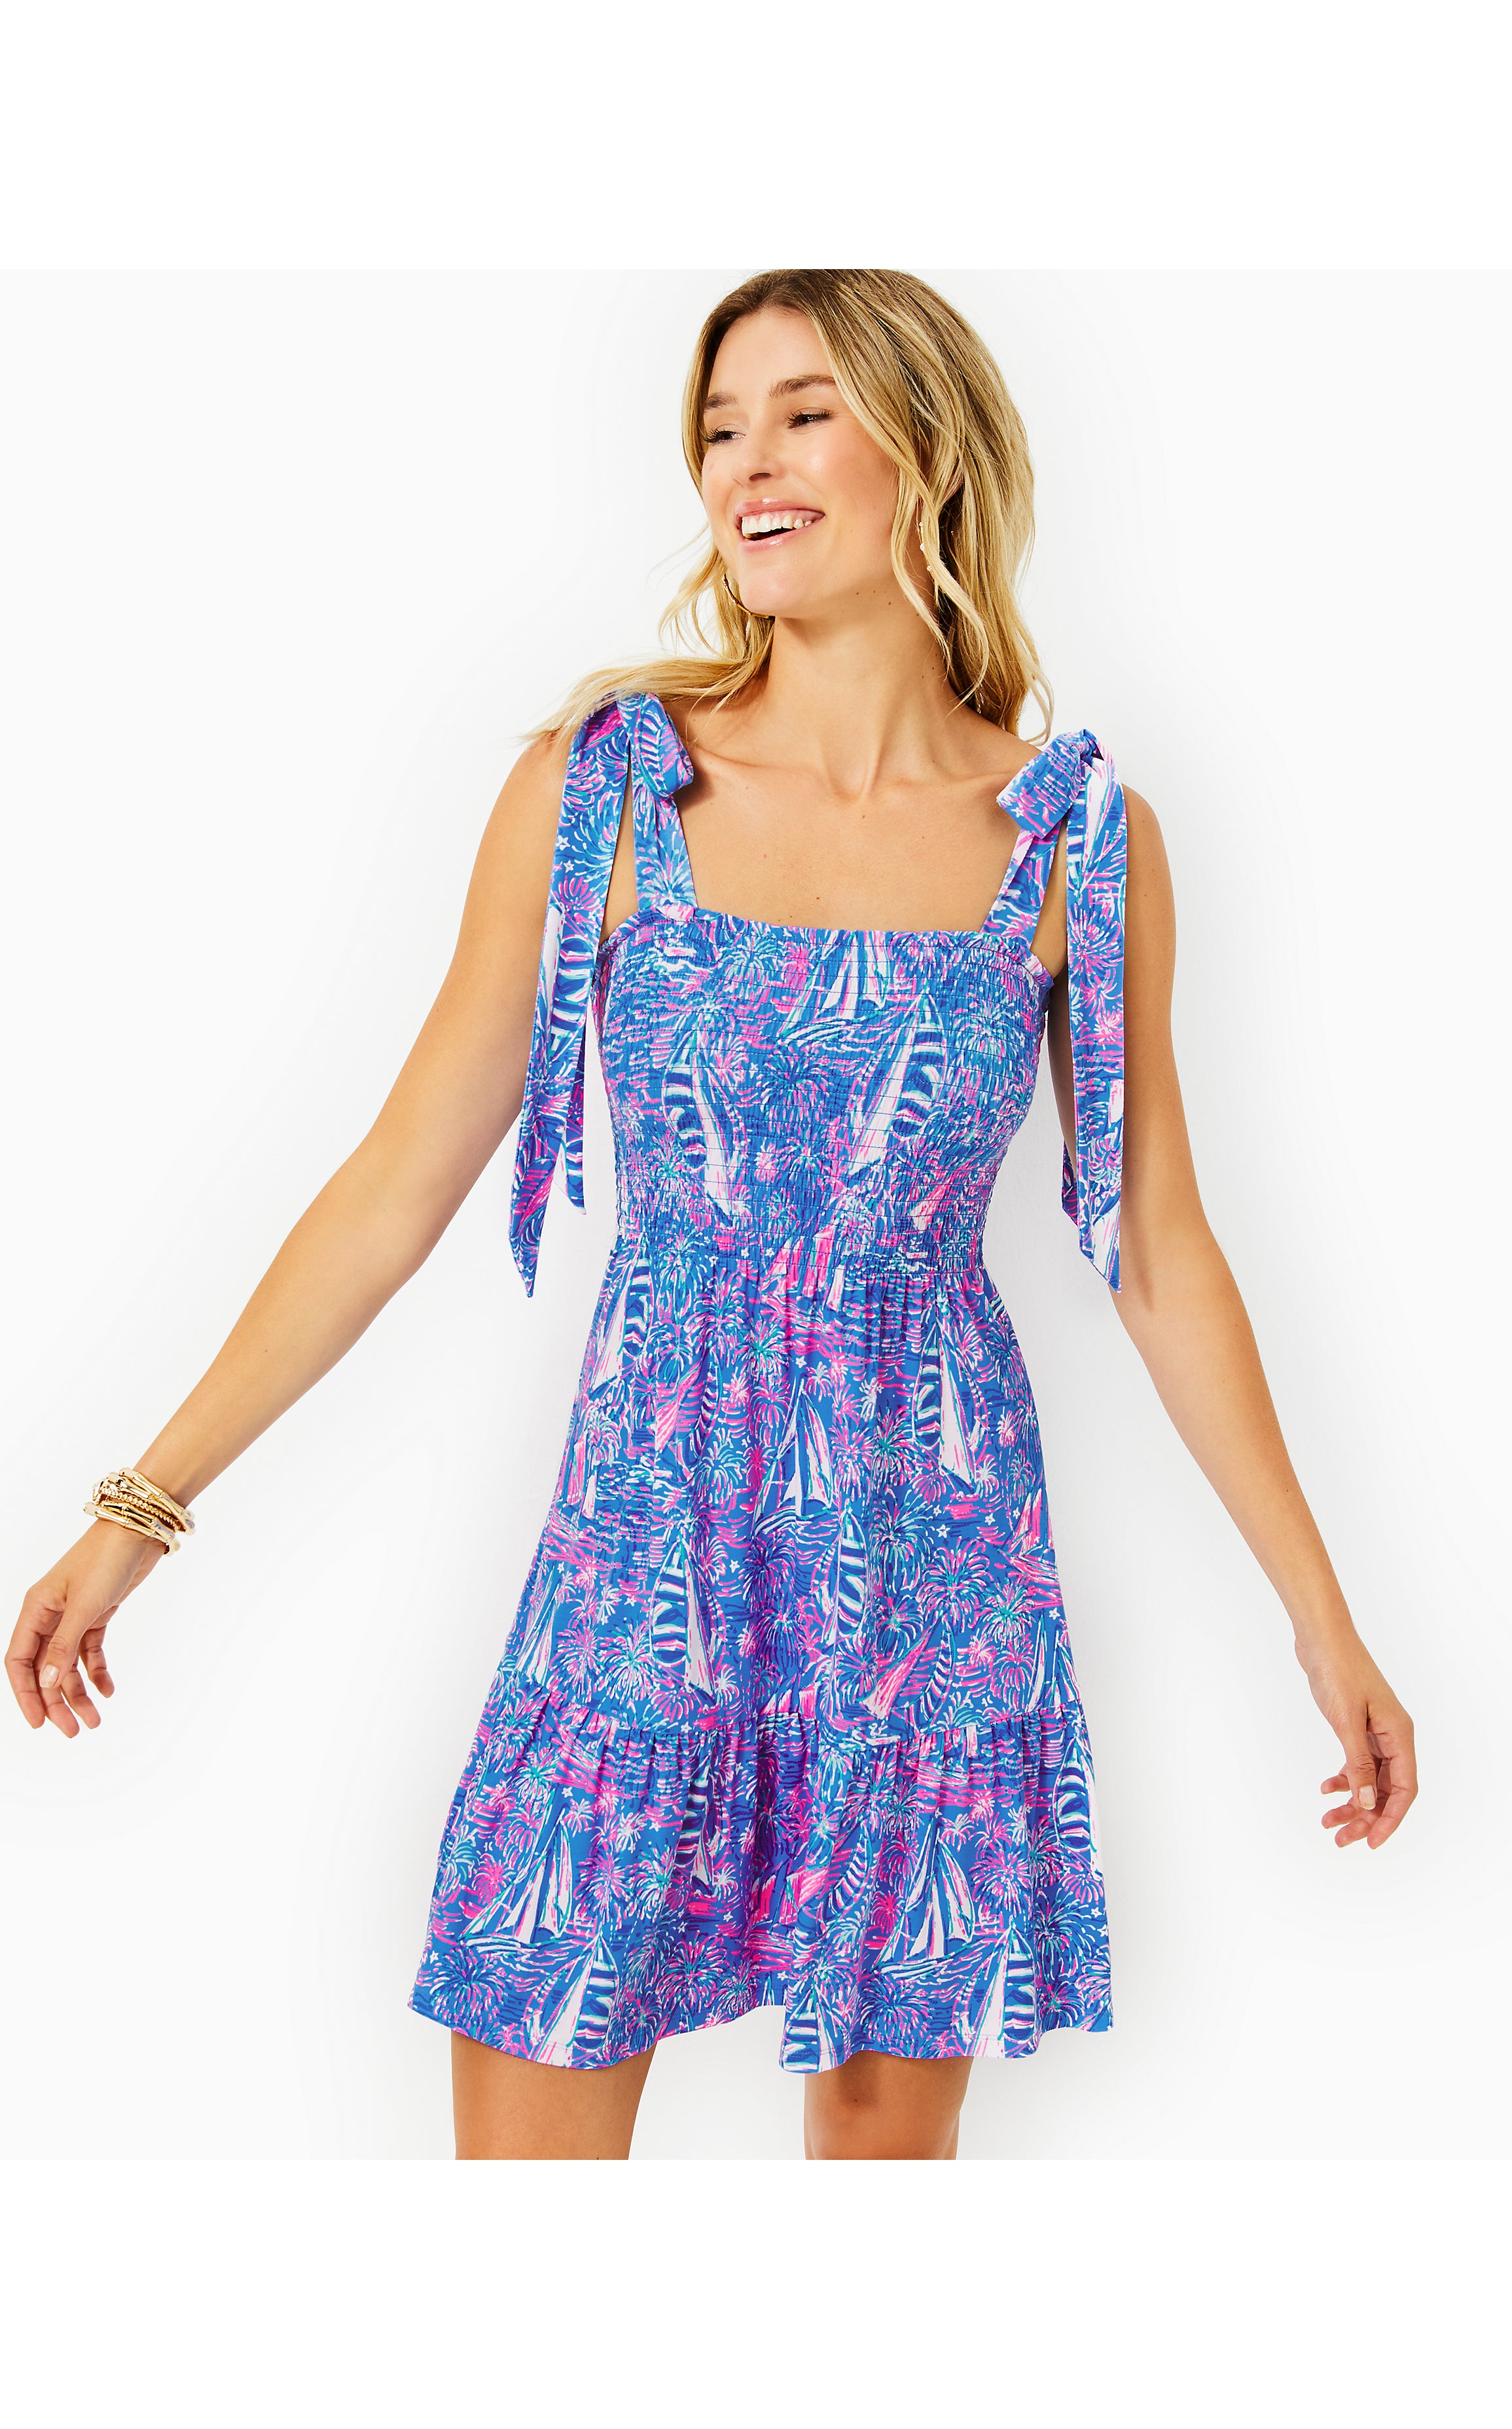 KAILUA SMOCKED DRESS – Pink Sorbet | Lilly Pulitzer Store Columbia, SC